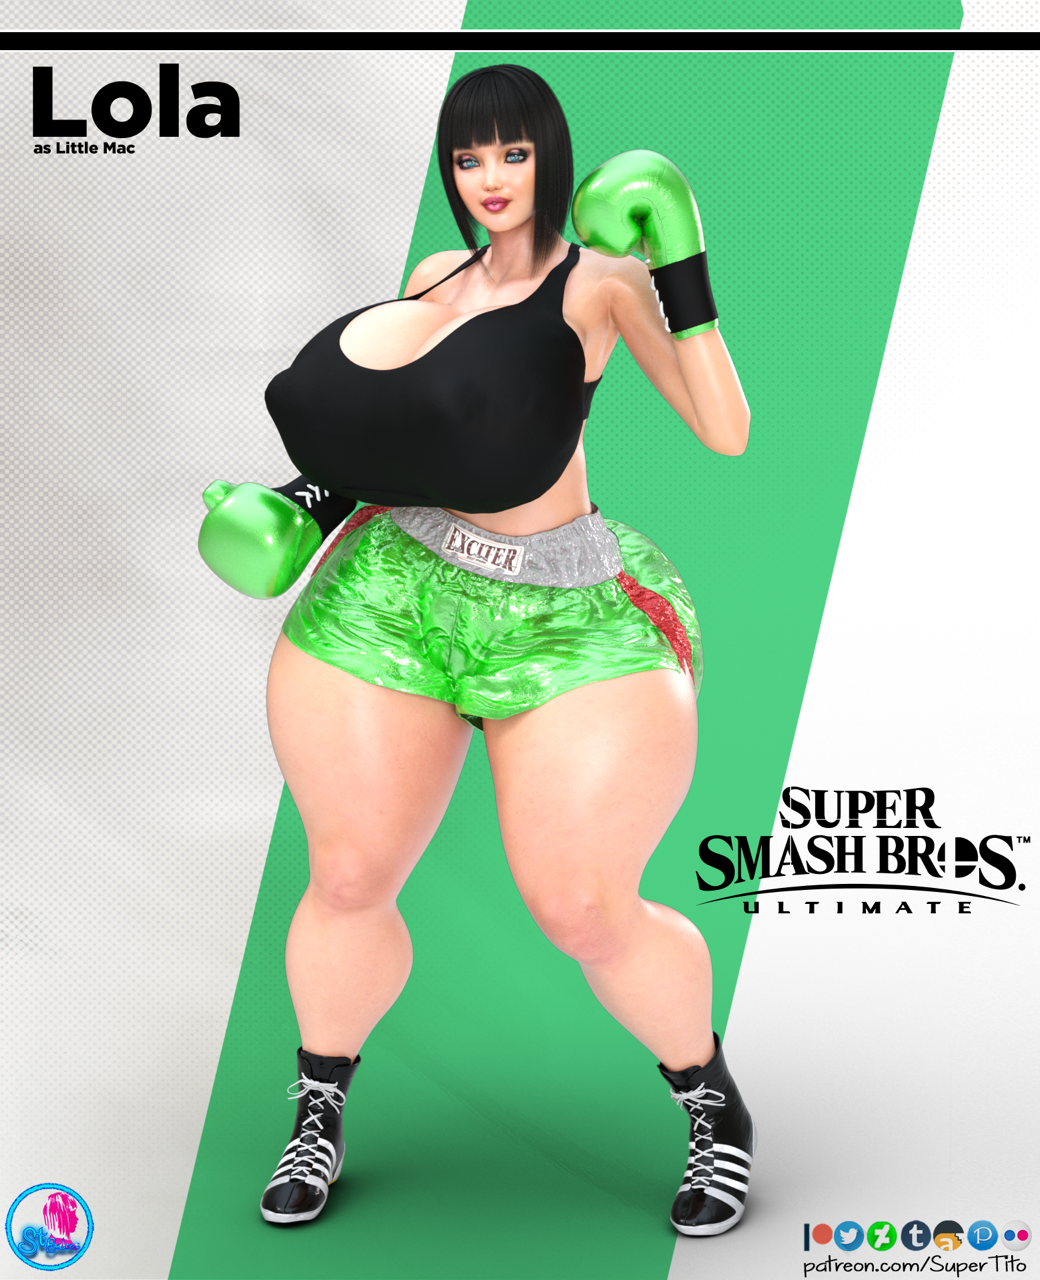 supertitoblog:  Today is pic is Lola as Little Mac“Show ‘em what you got, Mac